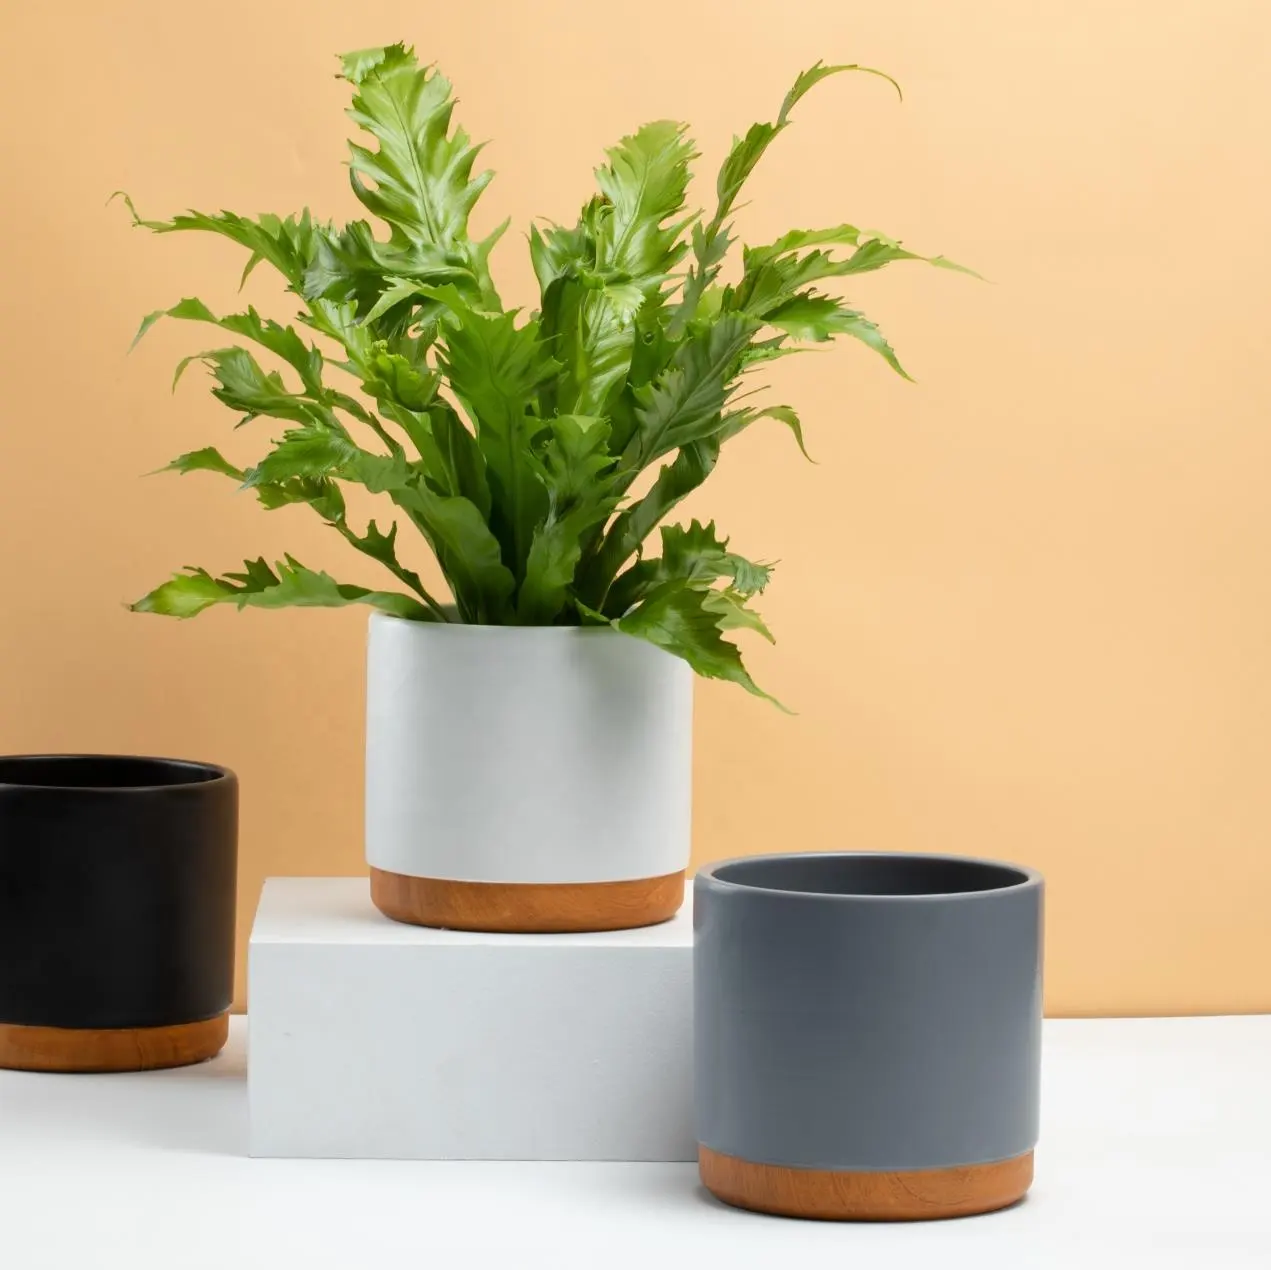 Succulent Plant Pots 6 inch Wood Grain Ceramic Matte Planters with Drainage Hole With Gift box